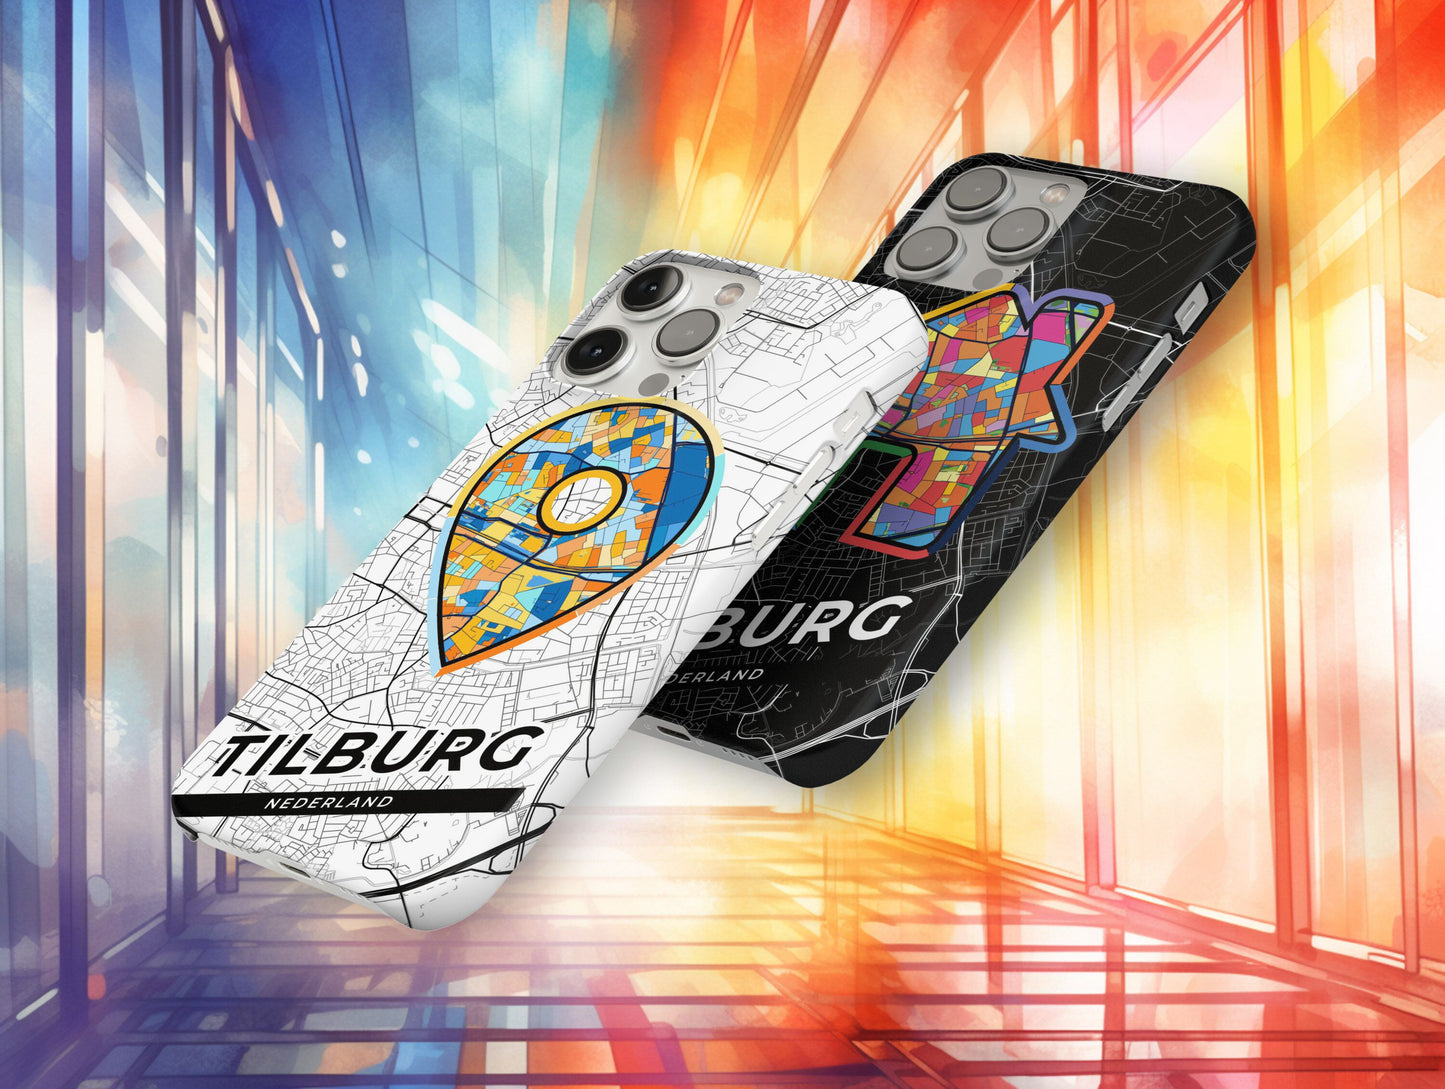 Tilburg Netherlands slim phone case with colorful icon